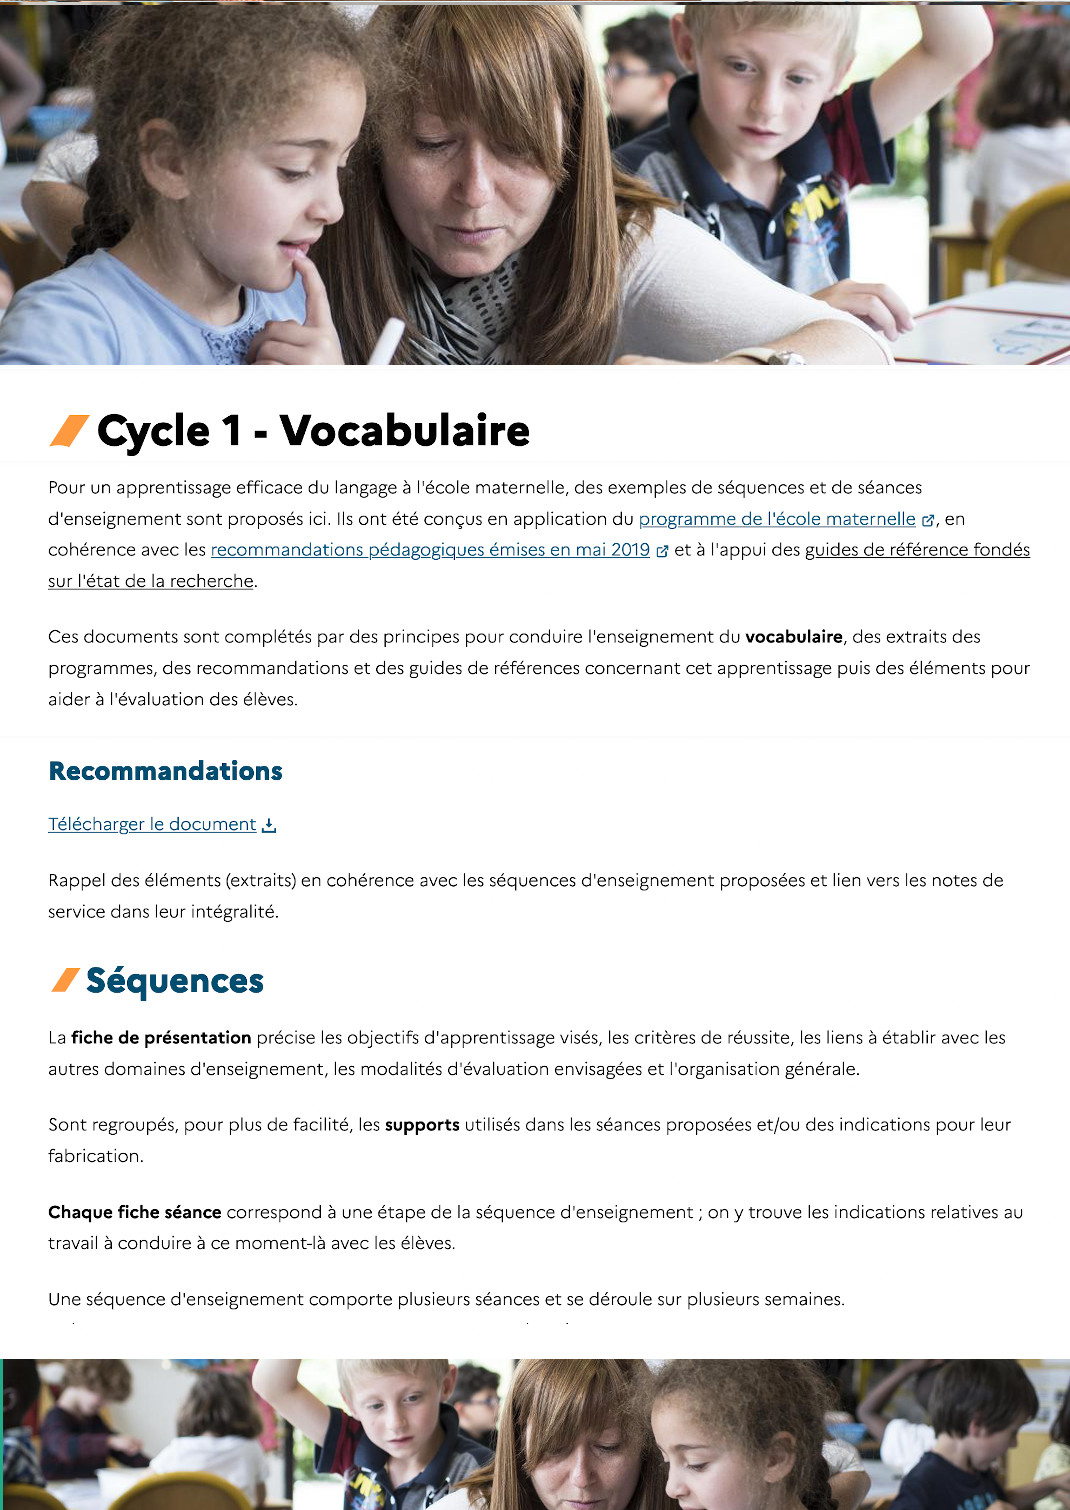 Cycle 1 - Vocabulaire